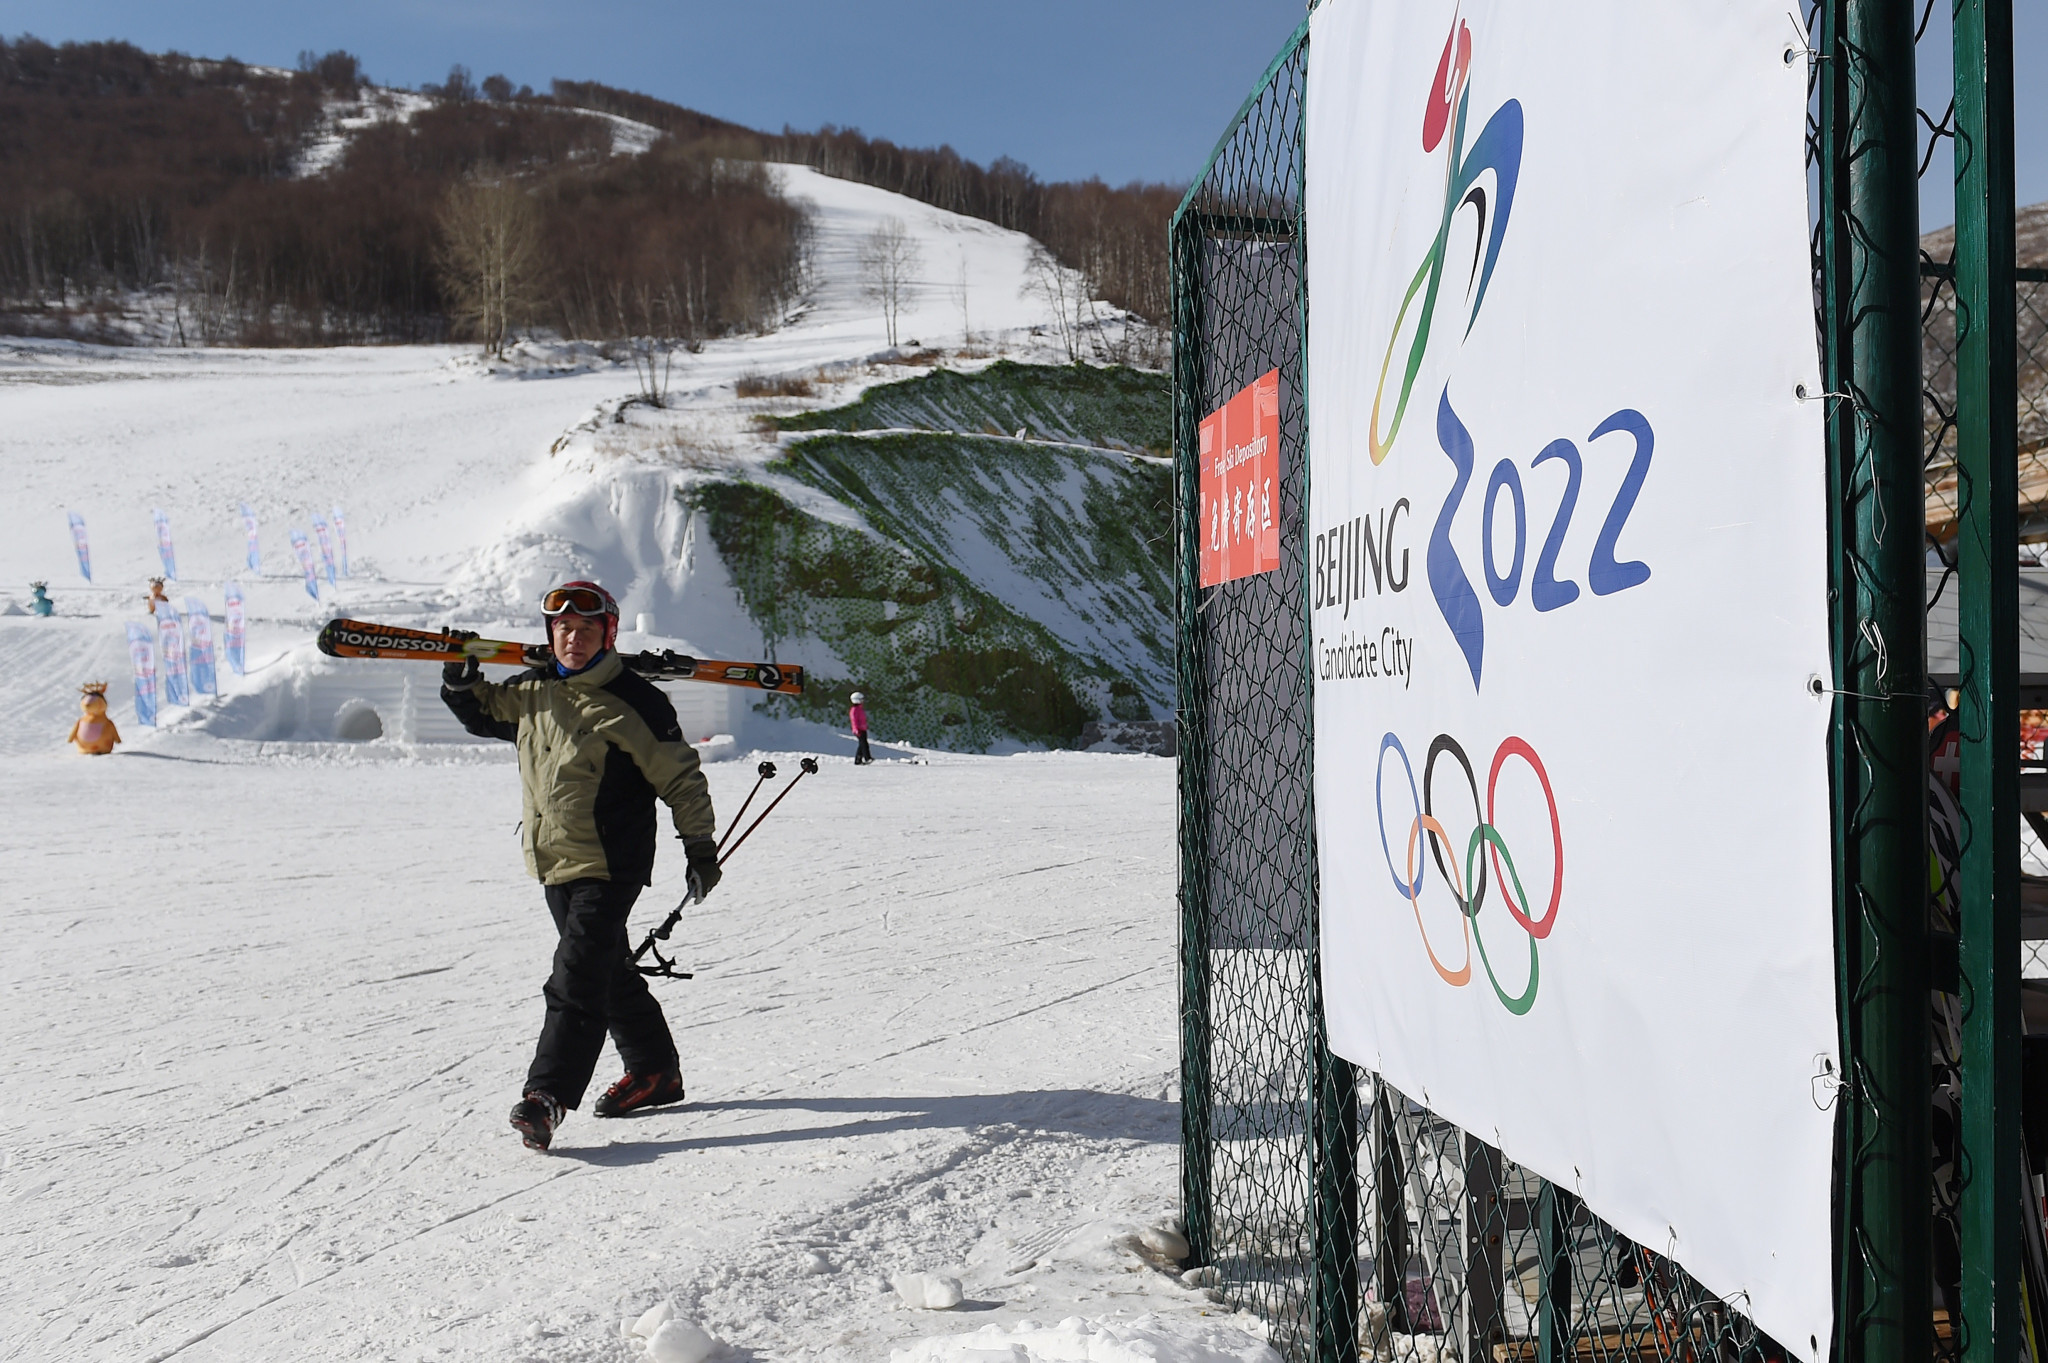 The Chongli district will host Nordic combined, cross-country skiing, ski jumping, biathlon, freestyle skiing and some snowboarding disciplines during Beijing 2022 ©Getty Images